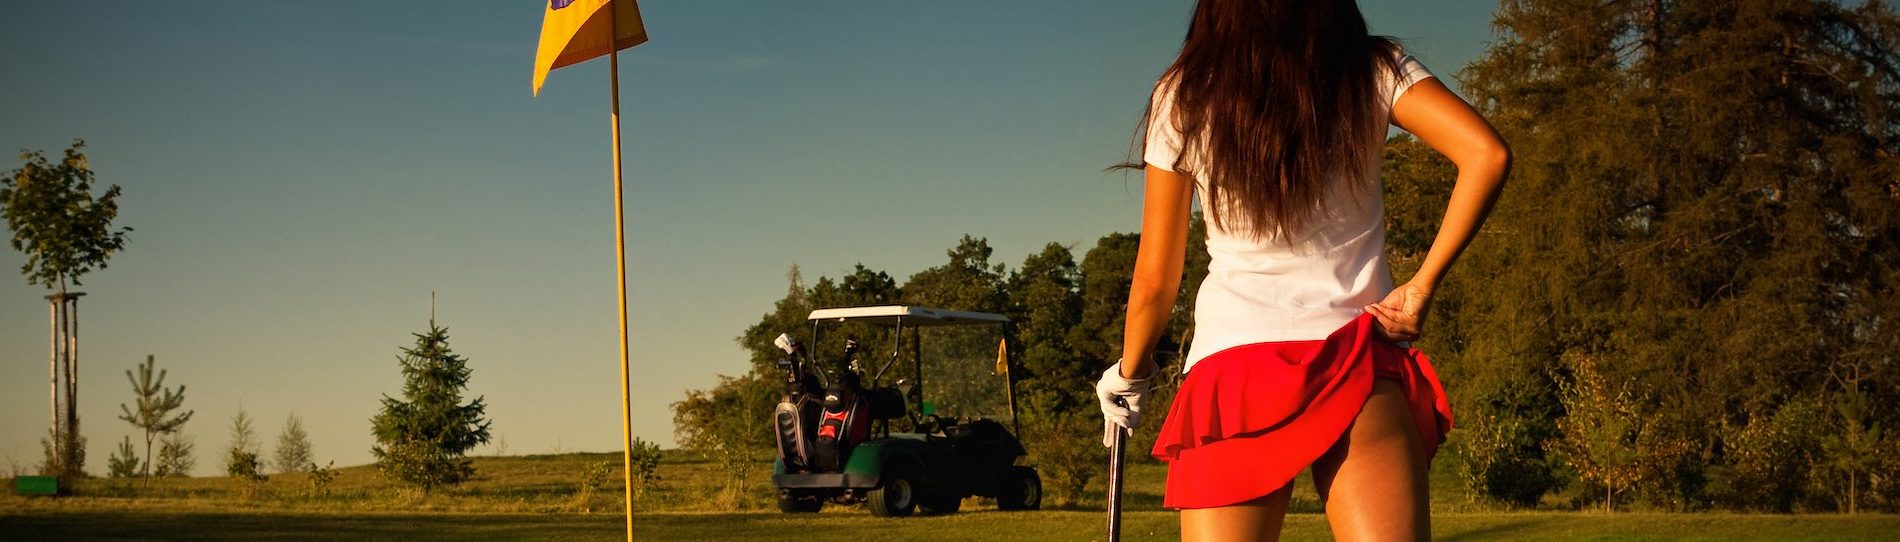 cheeky golf bunny holding up red skirt showing bum